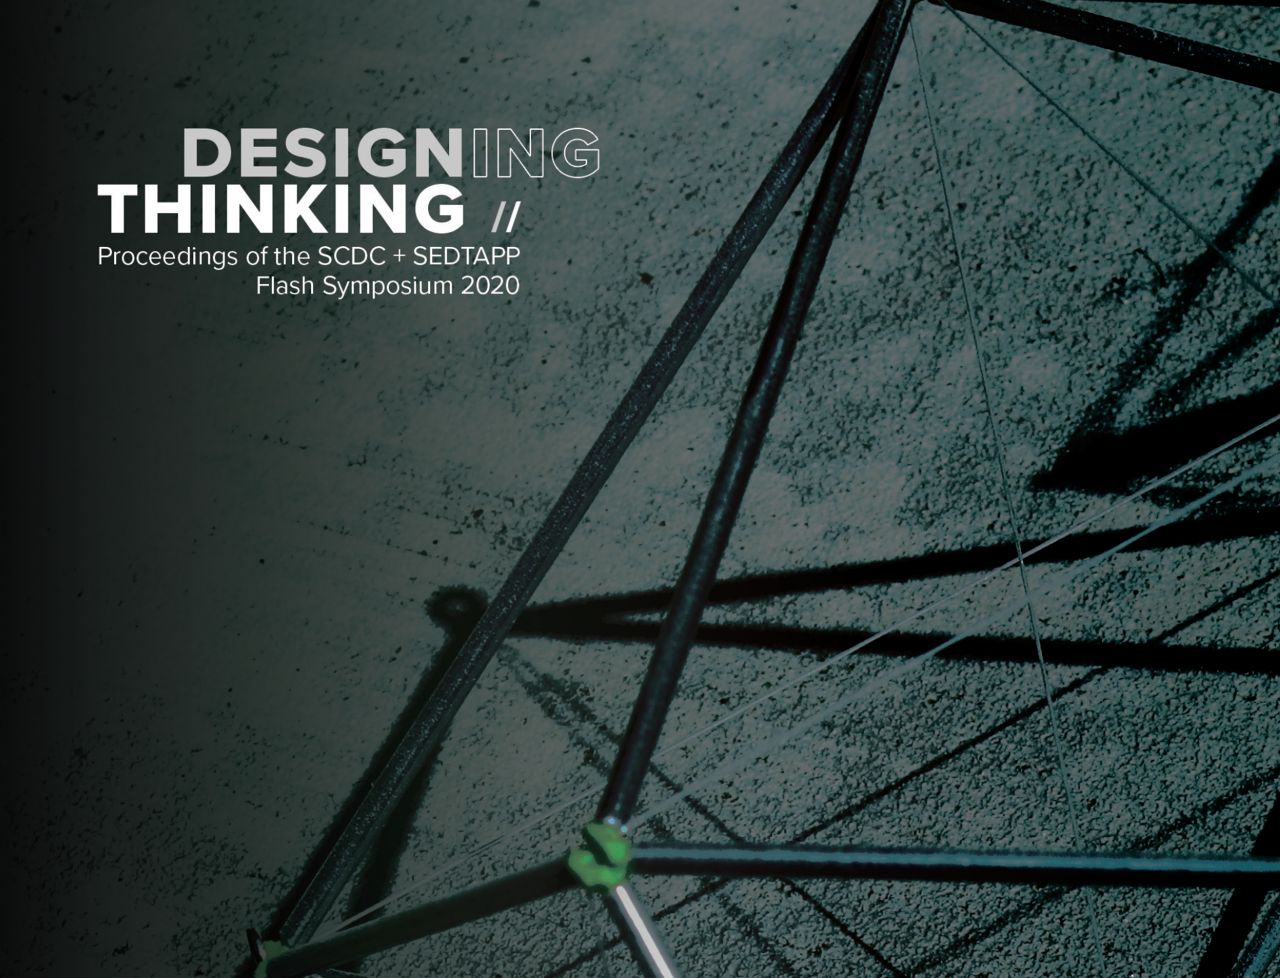 The cover of the Design Thinking publication